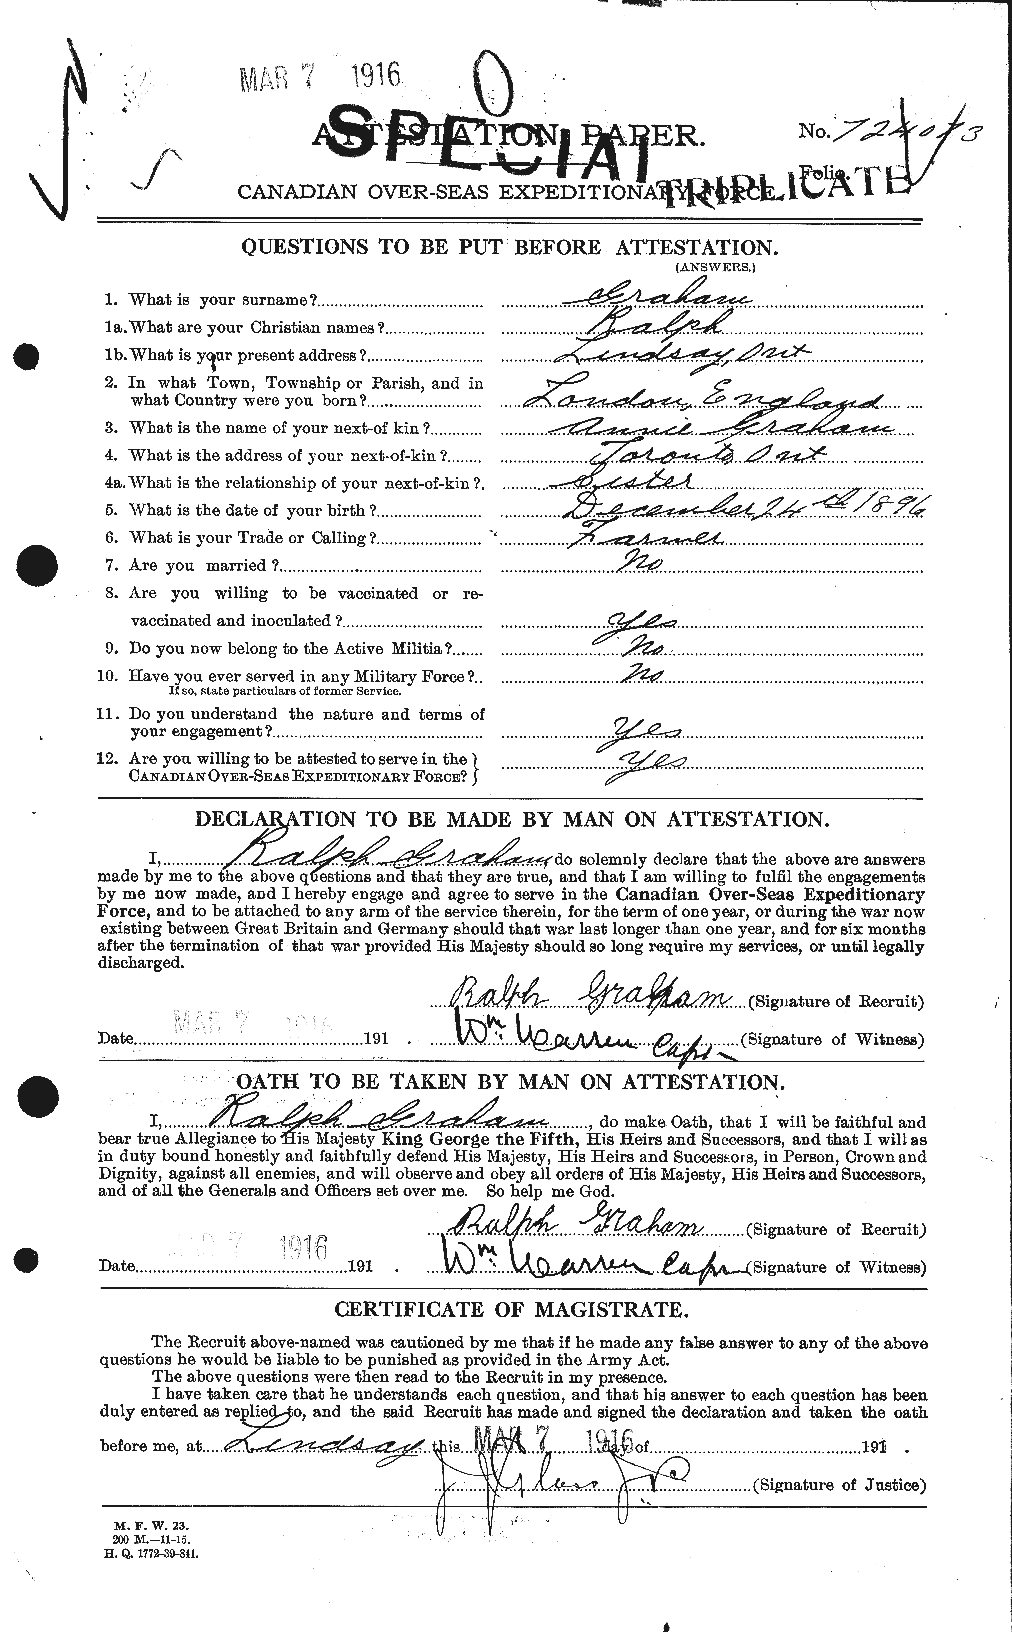 Personnel Records of the First World War - CEF 359354a